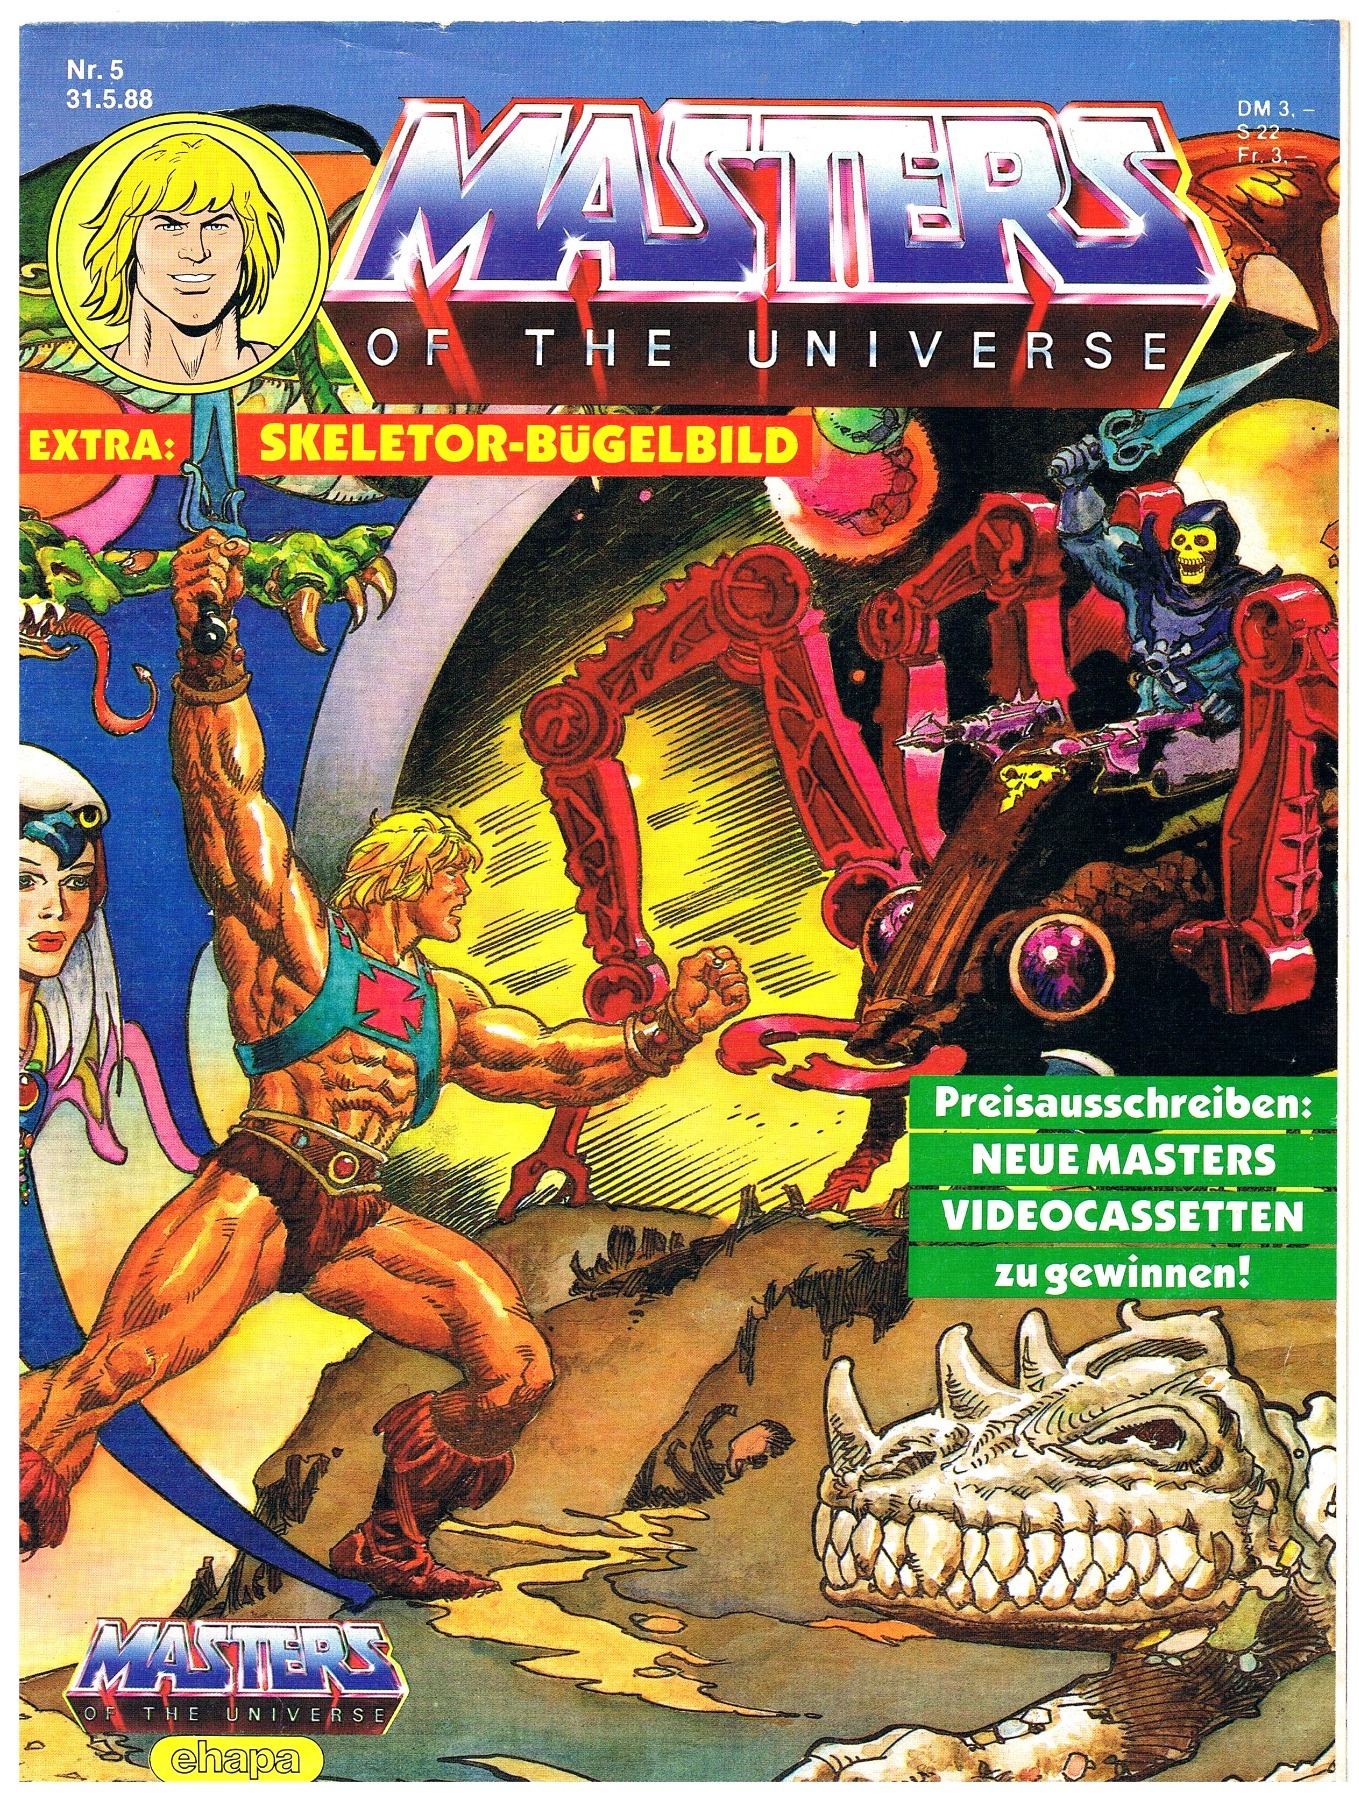 Masters of the Universe - Nr. 5 - 1988 Ehapa